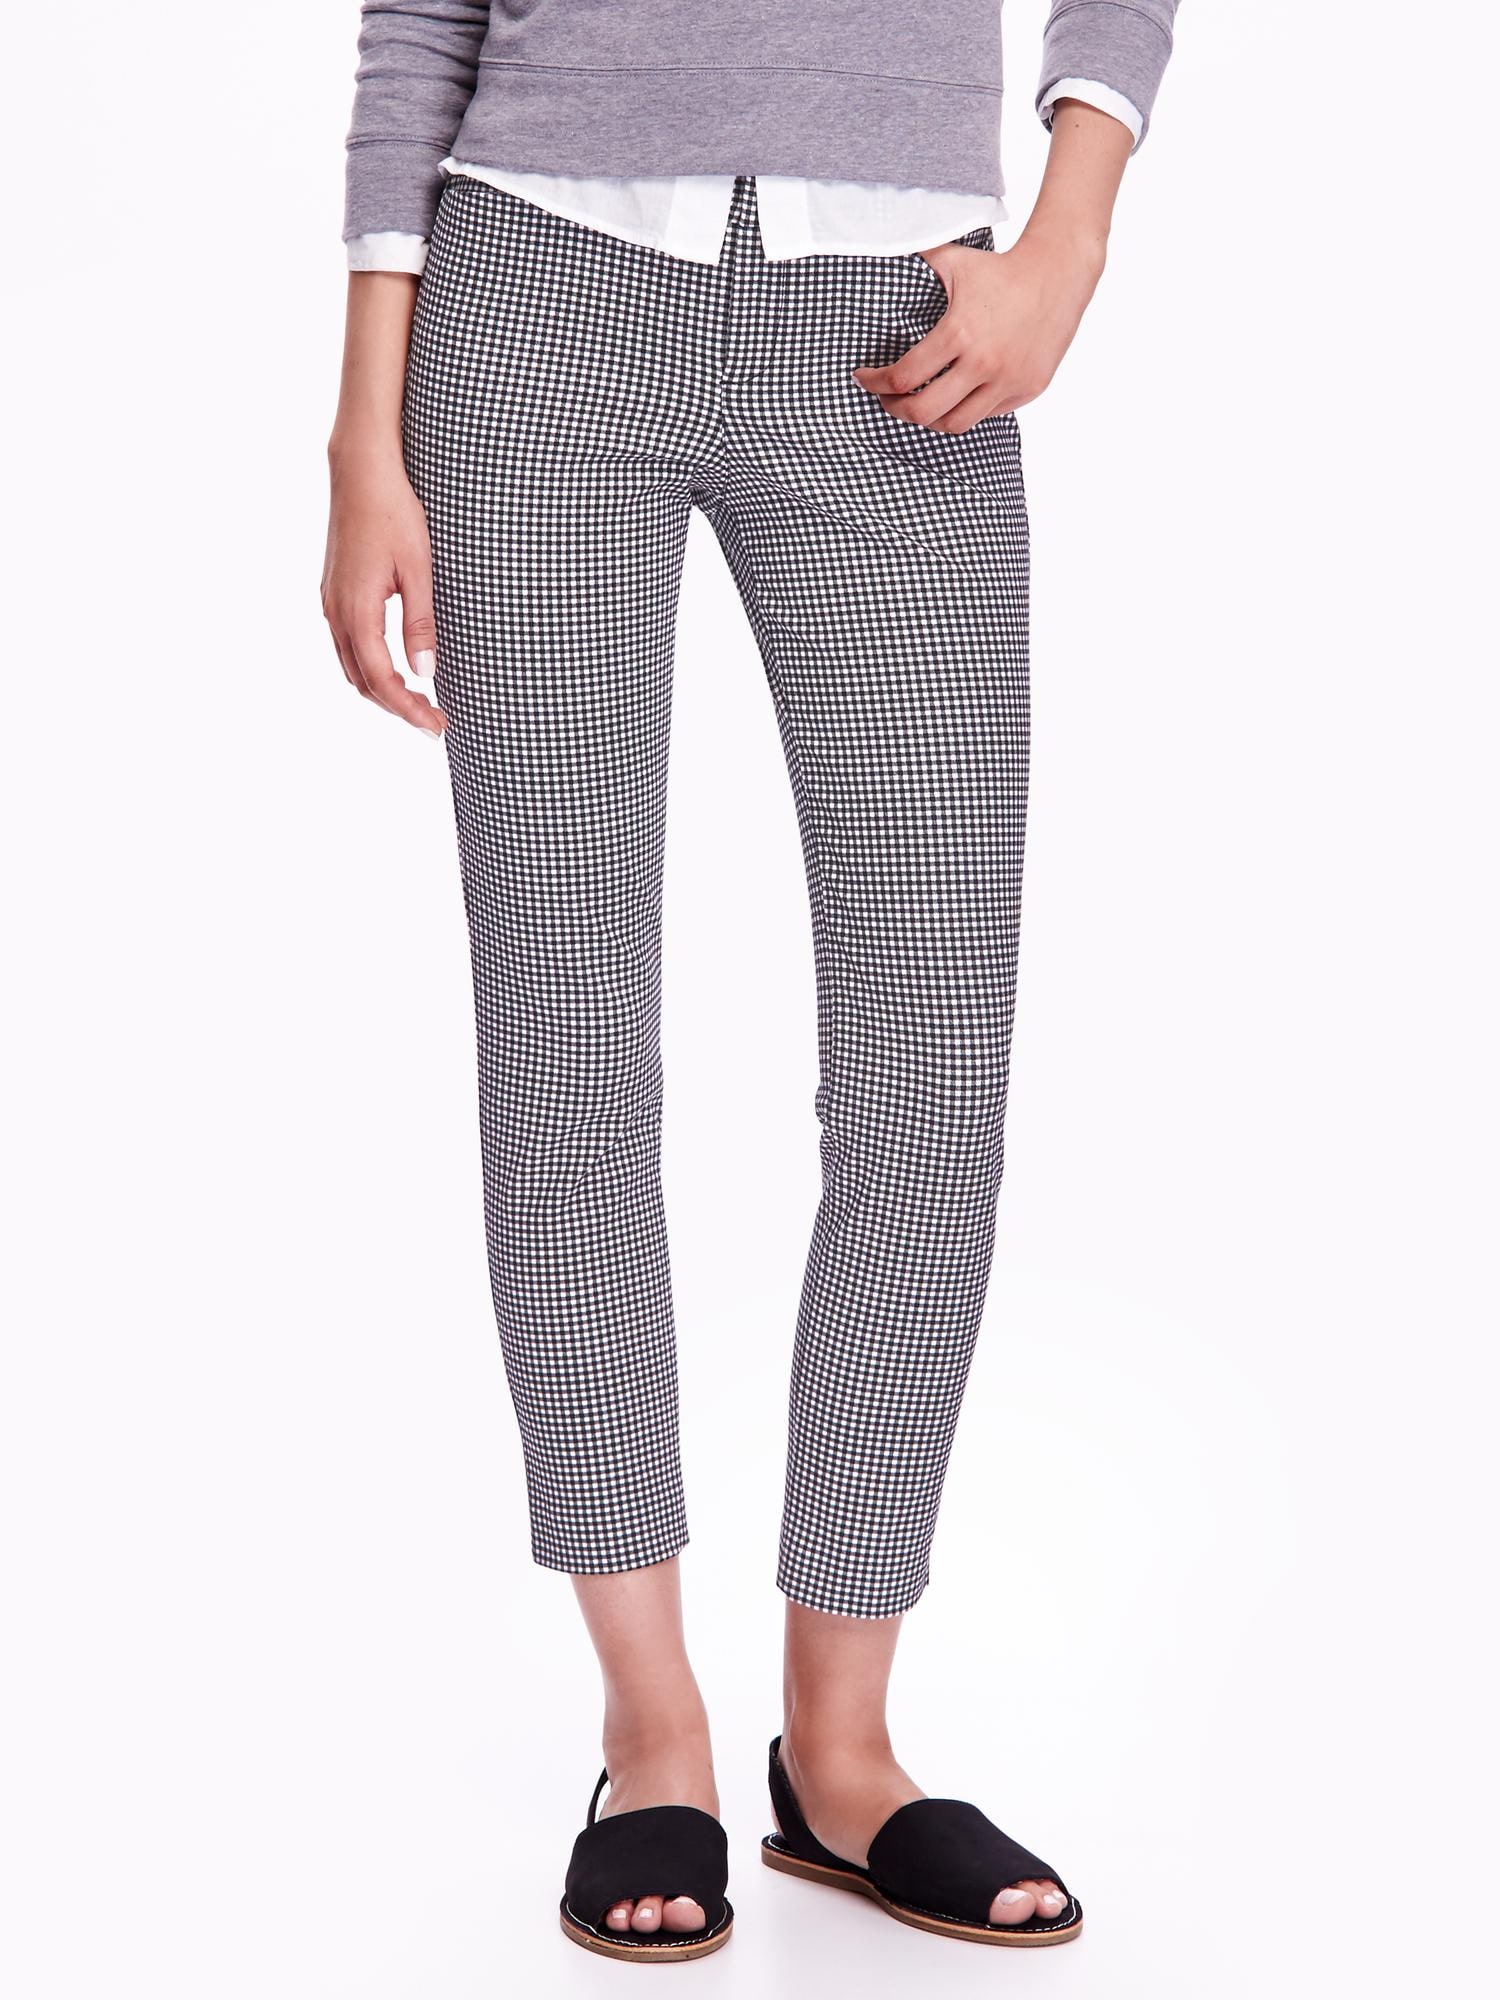 Old Navy All-New Mid-Rise Pixie Ankle Pants for Women